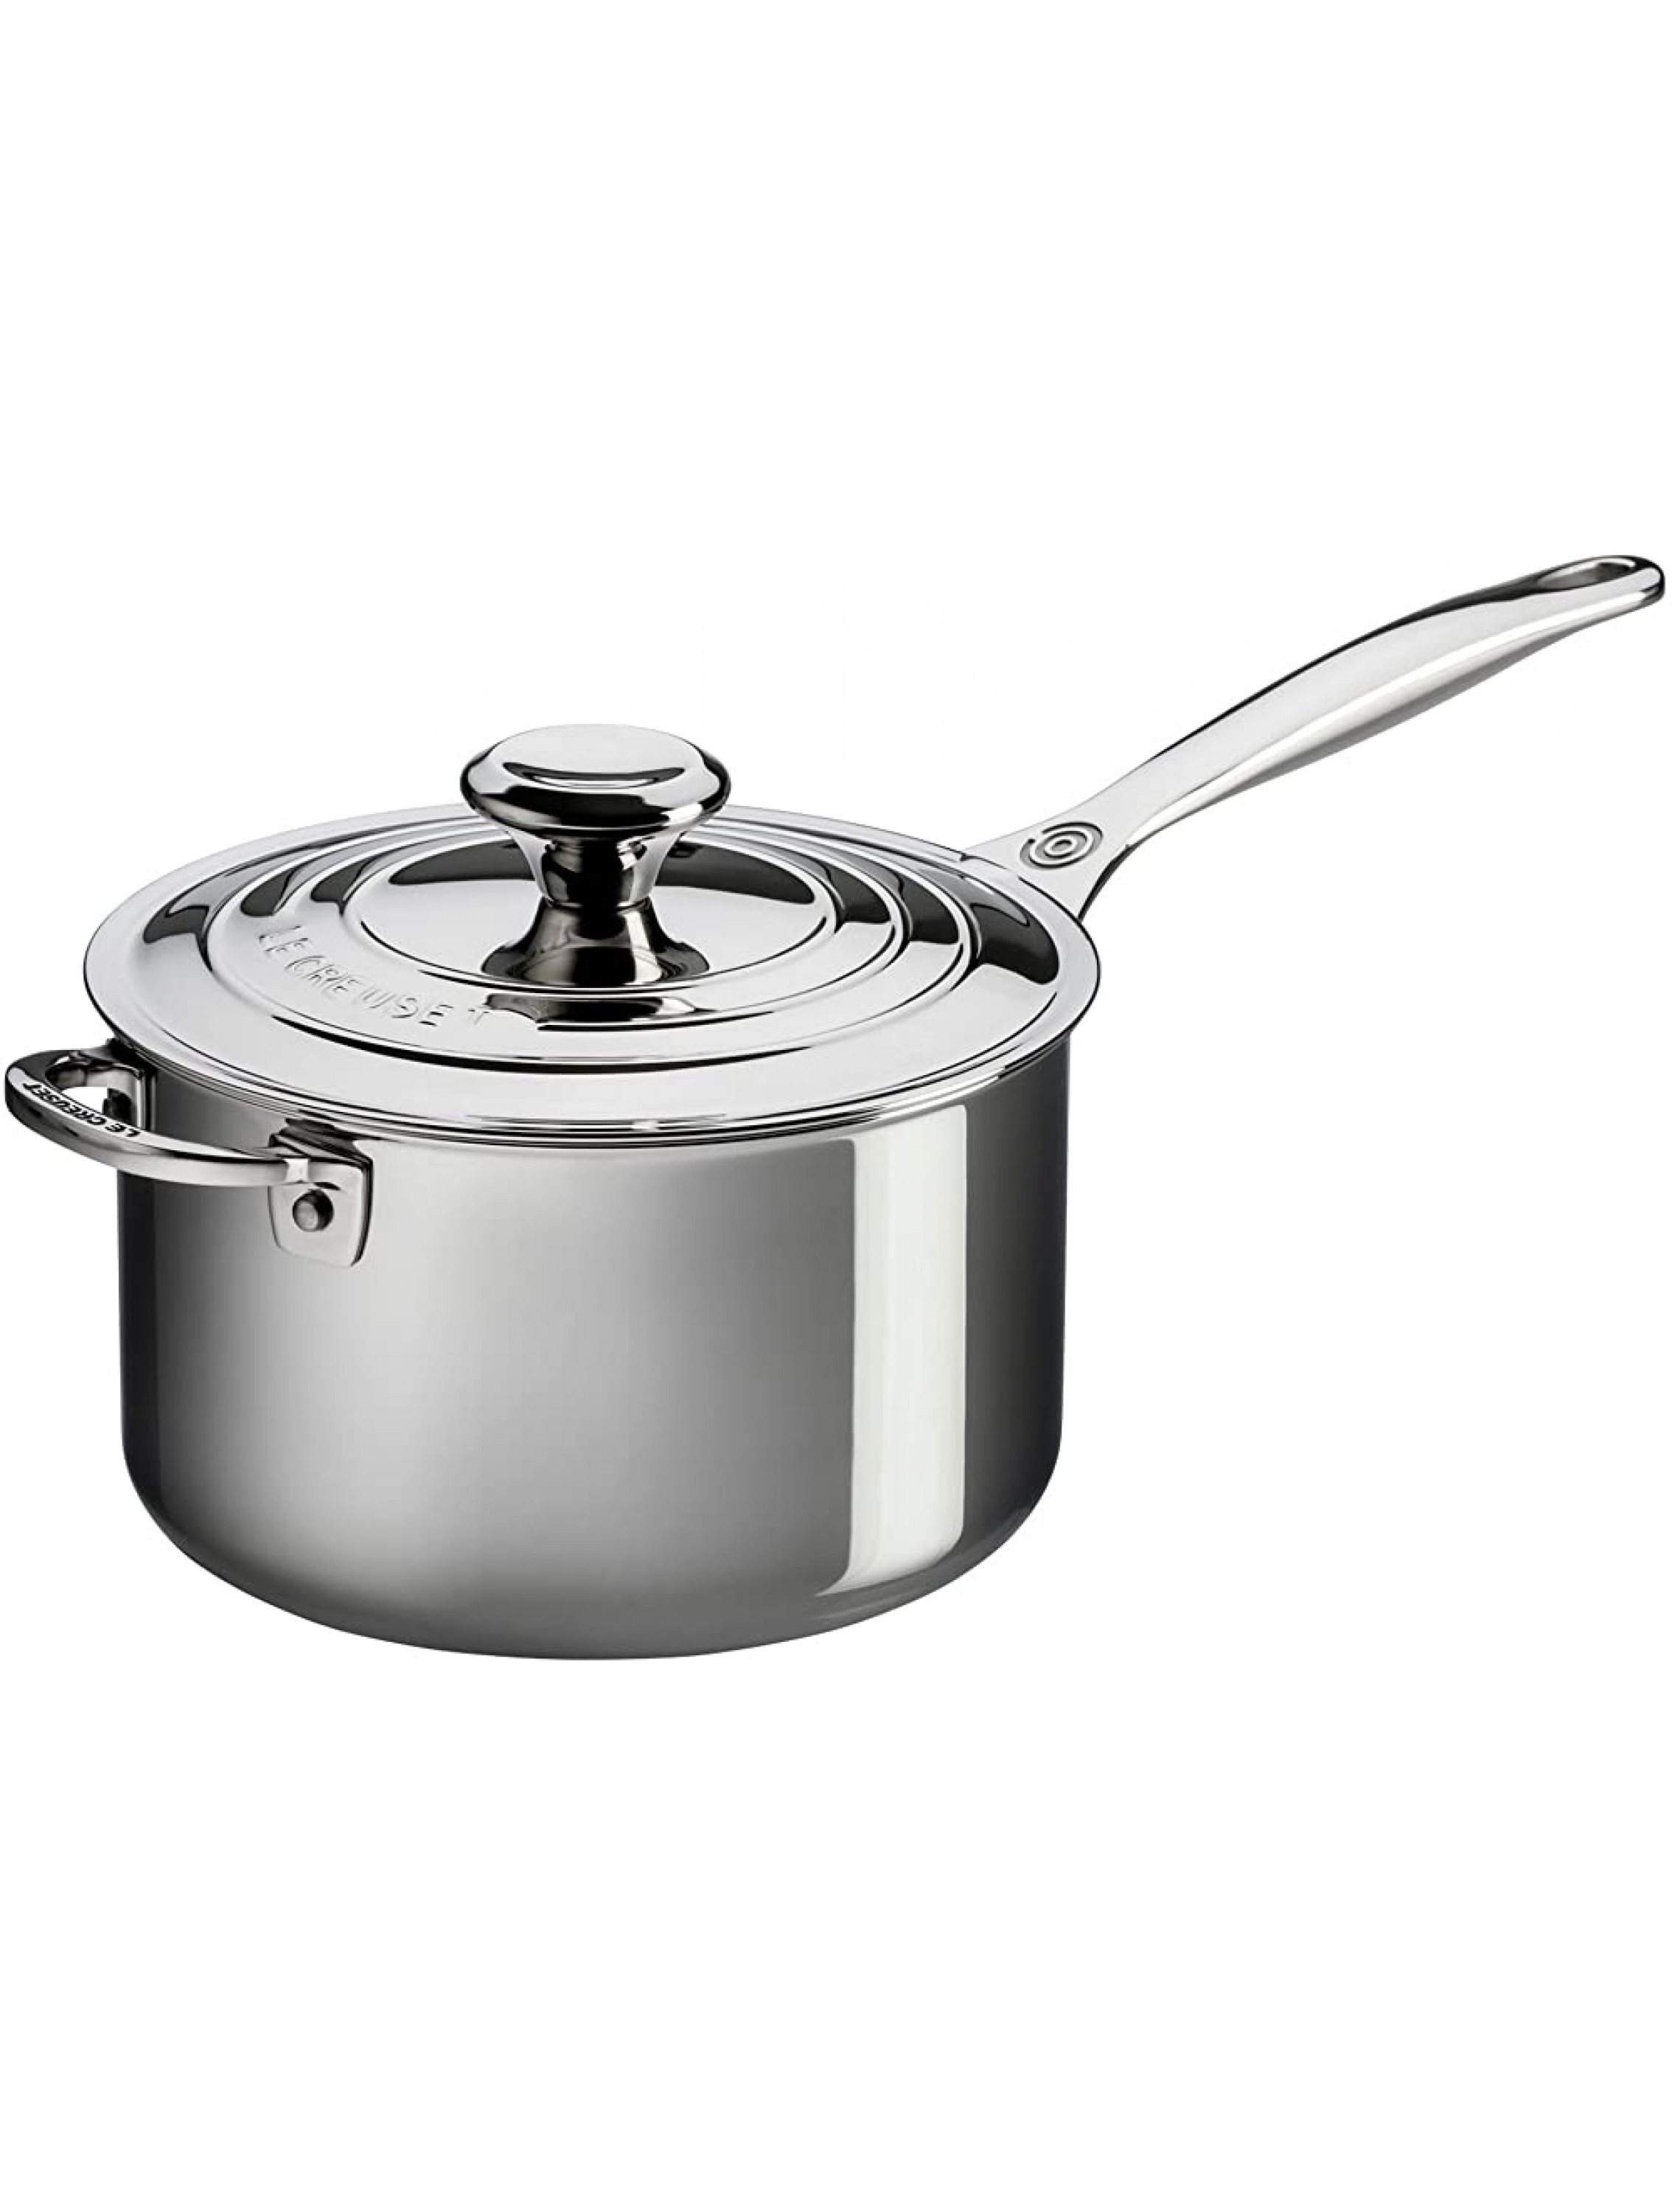 Le Creuset Tri-Ply Stainless Steel Saucepan with Helper Handle 4 qt. - BEDCI9O8N